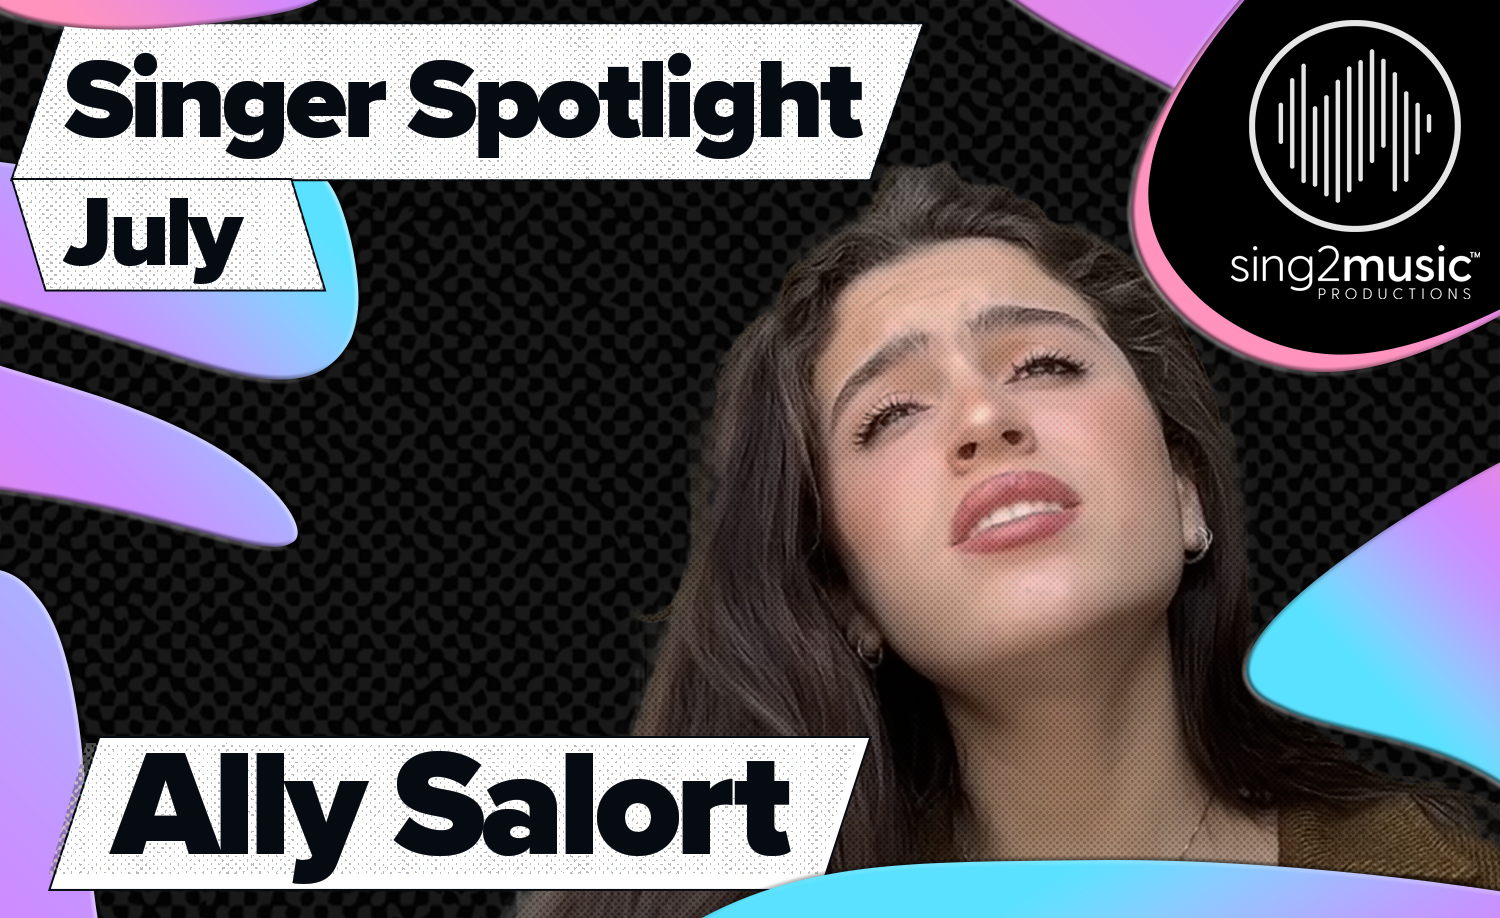 Ally Salort performing covers of songs by artists including Olivia Rodrigo and Billie Eilish.